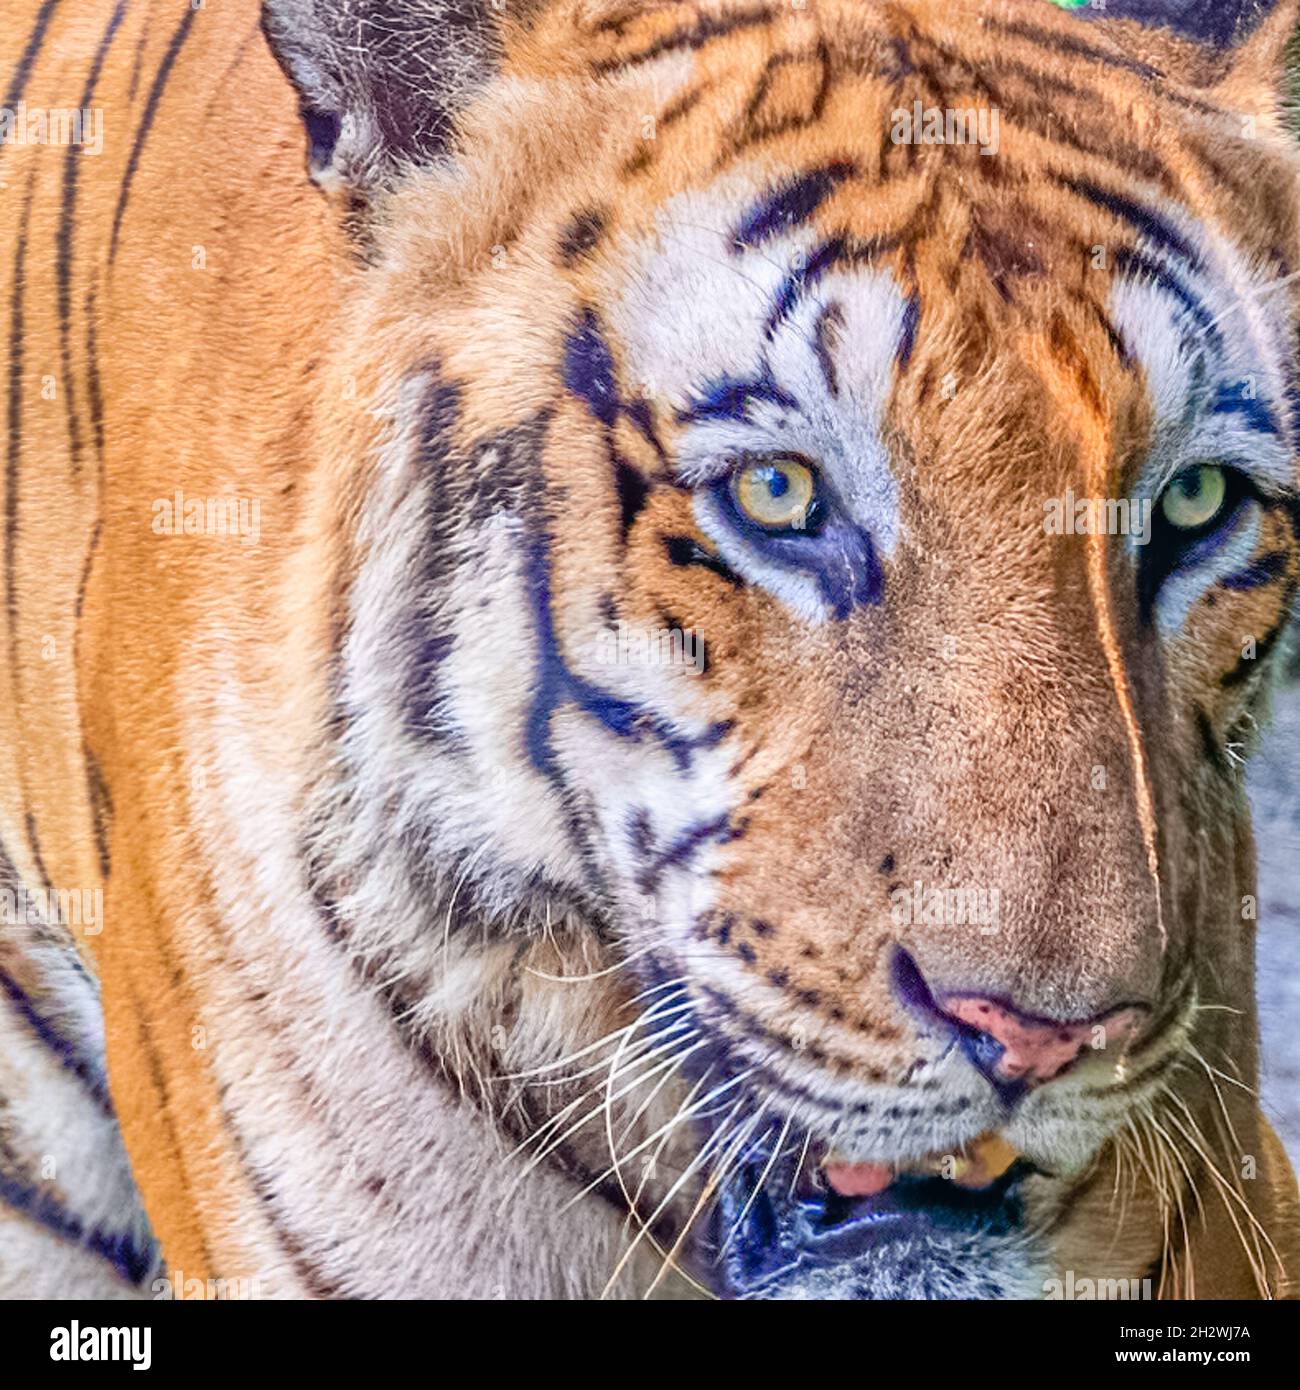 Tiger a close up with eyes wide open Stock Photo